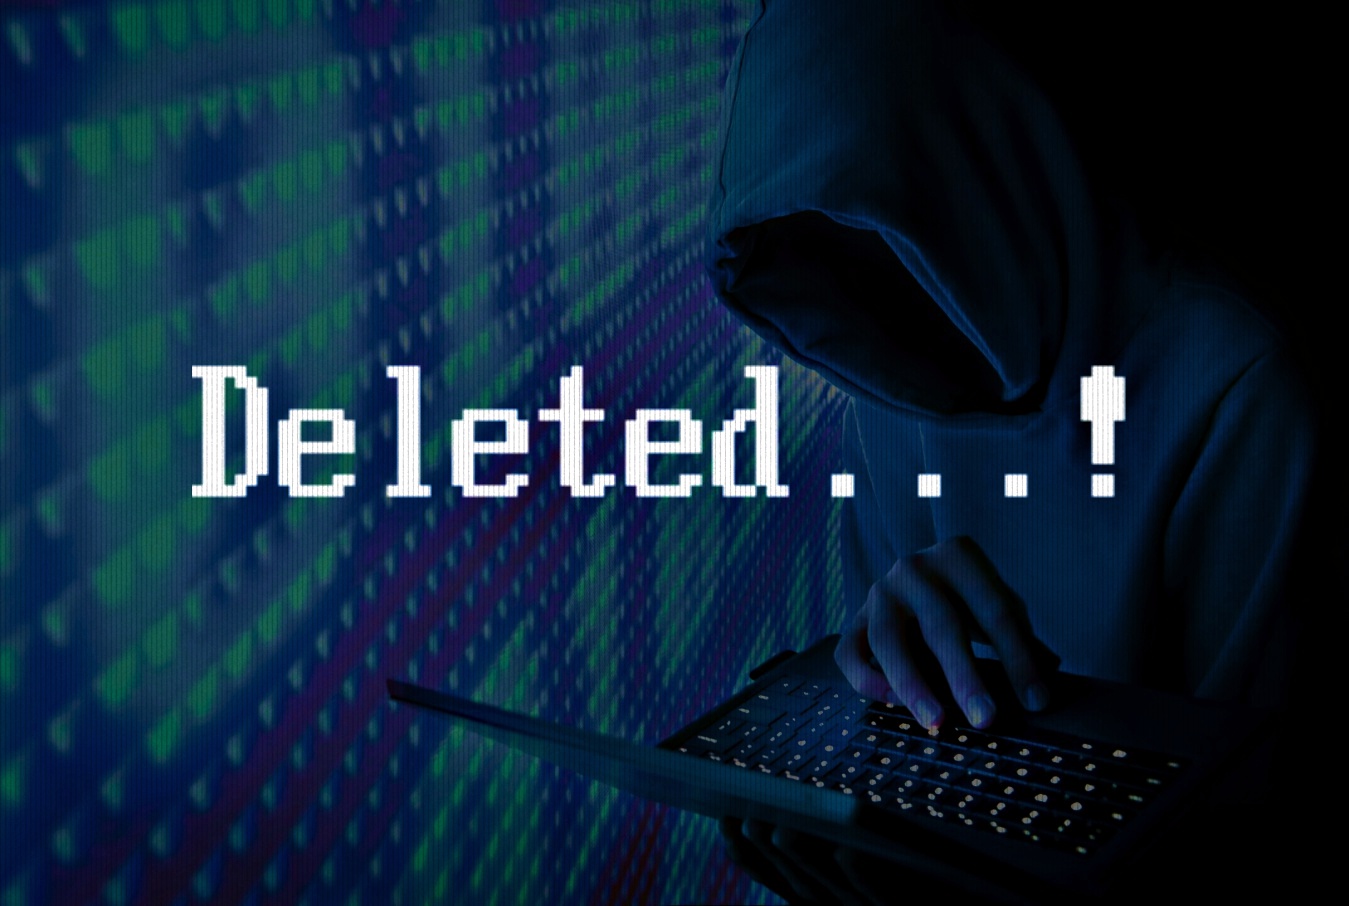 Email service provider loses 2 decades worth of data due to hack attack